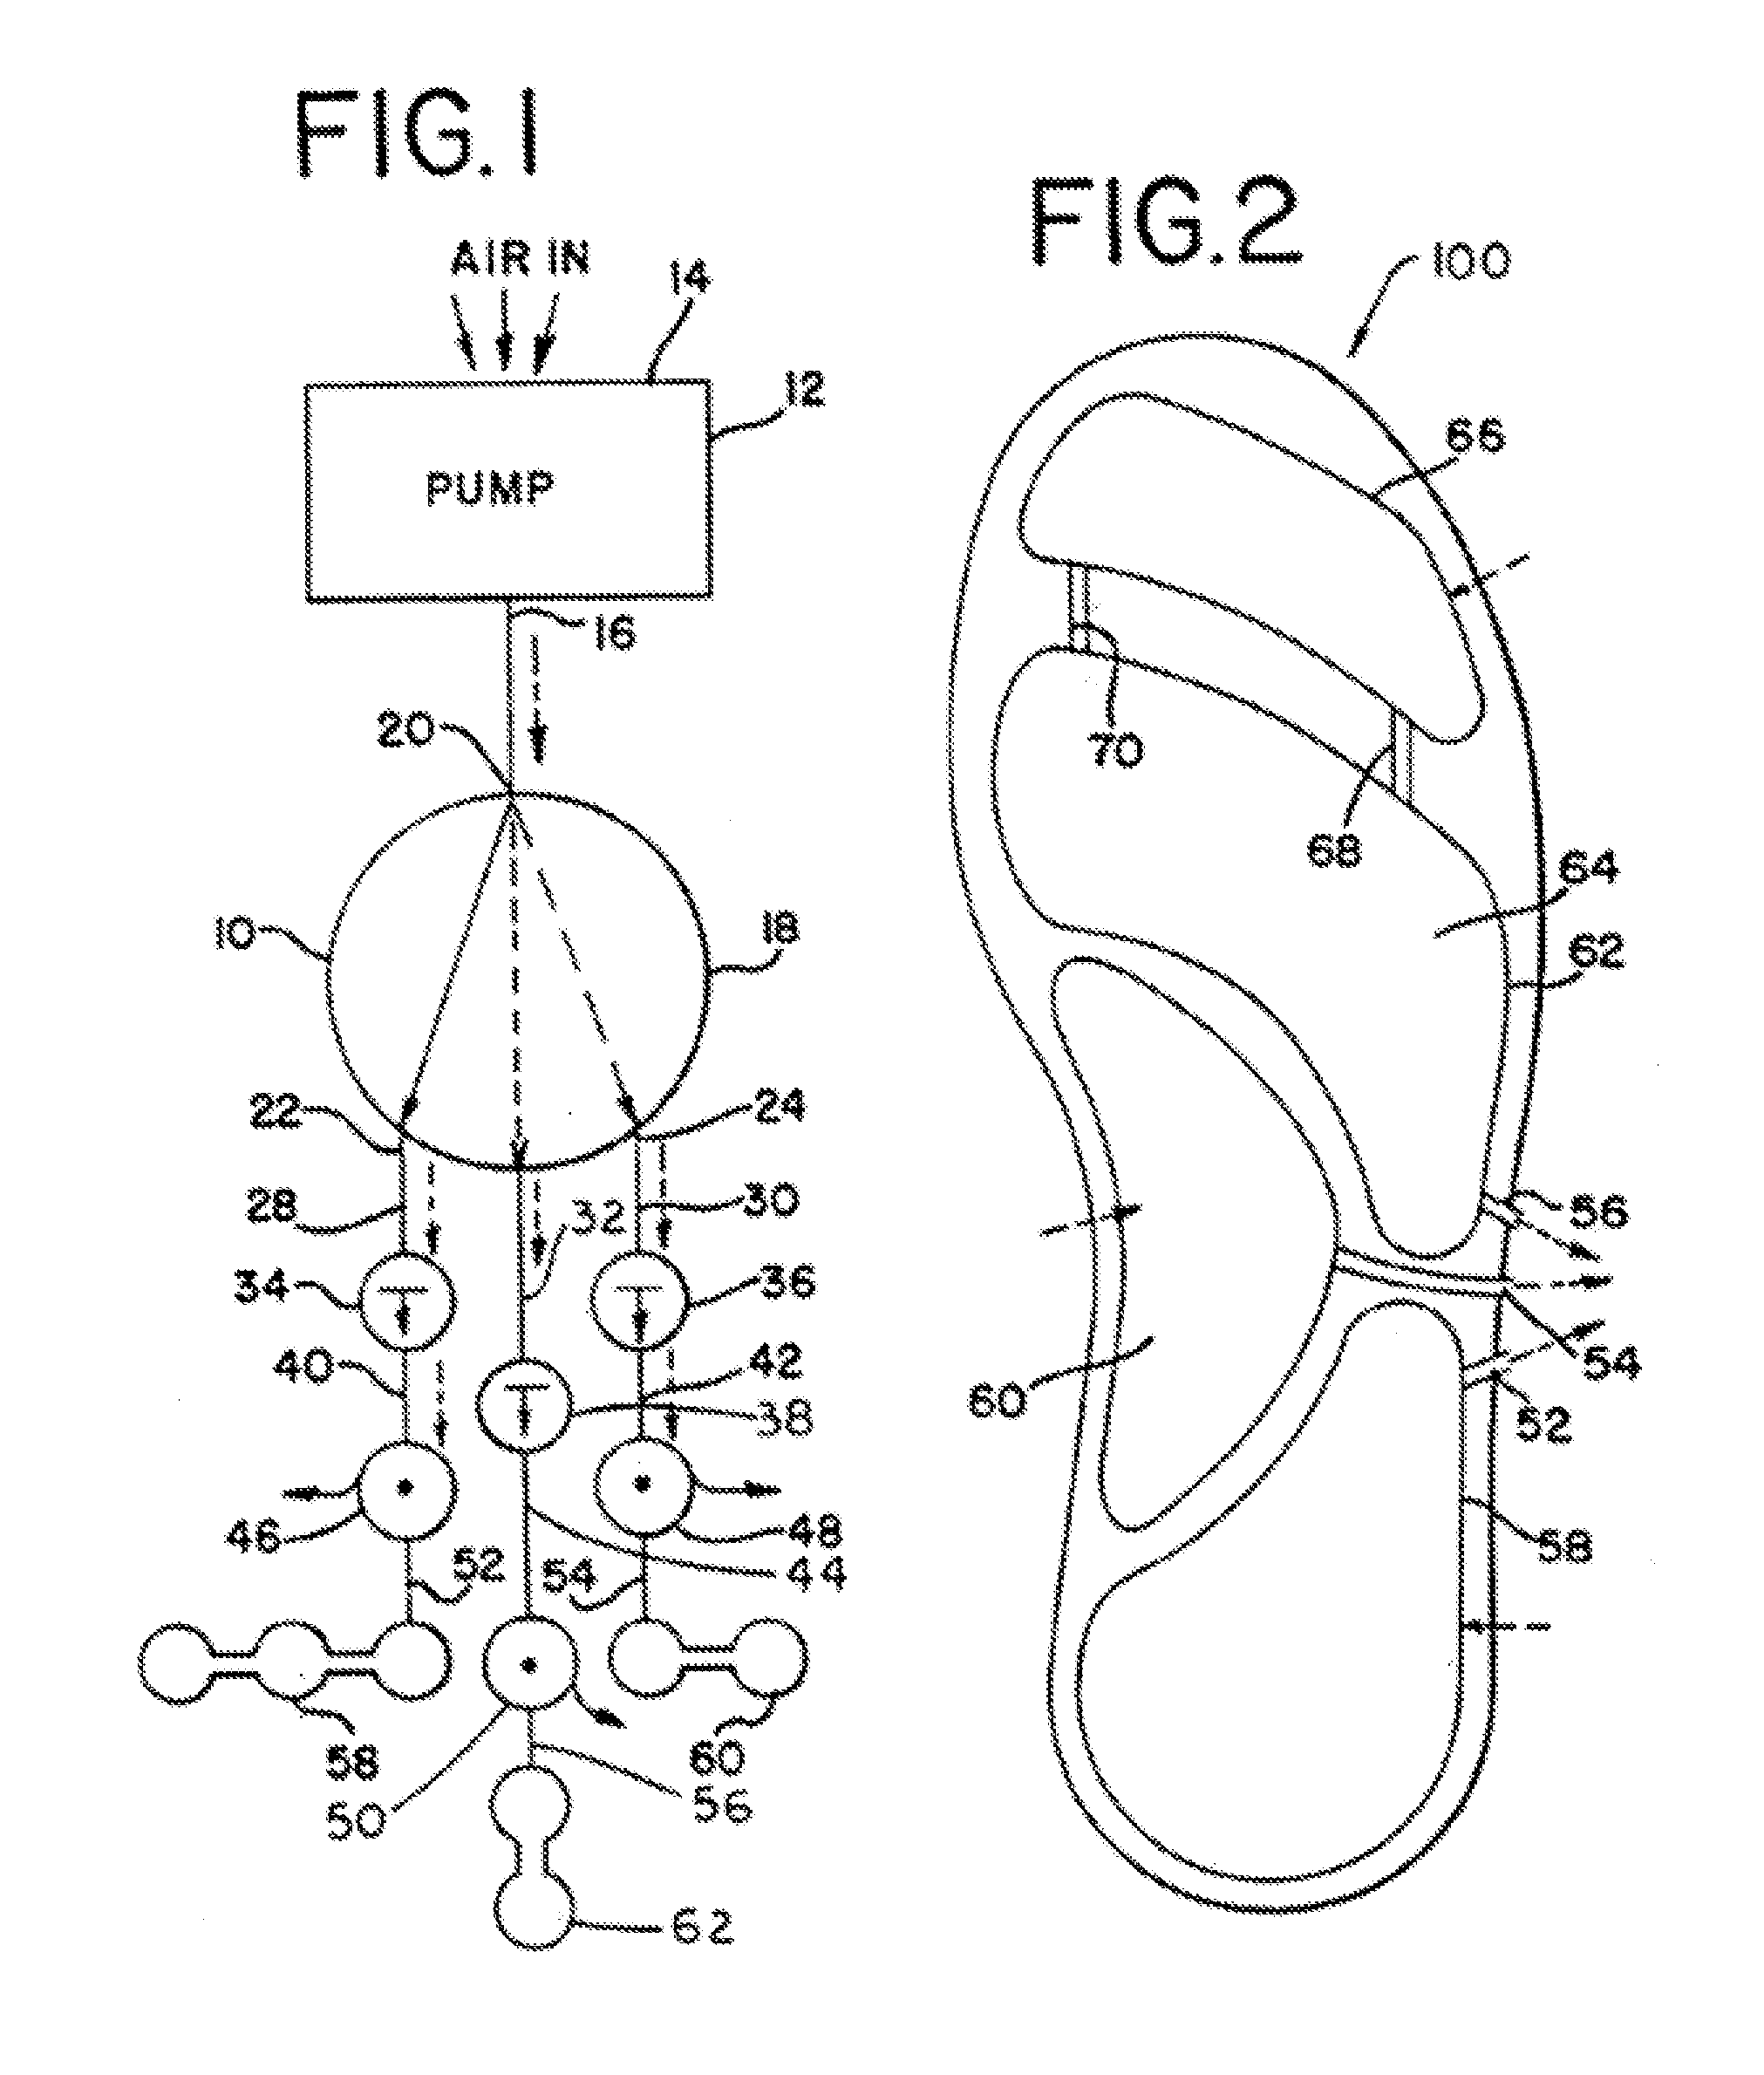 Pneumatic inflating device contained entirely within shoe sole